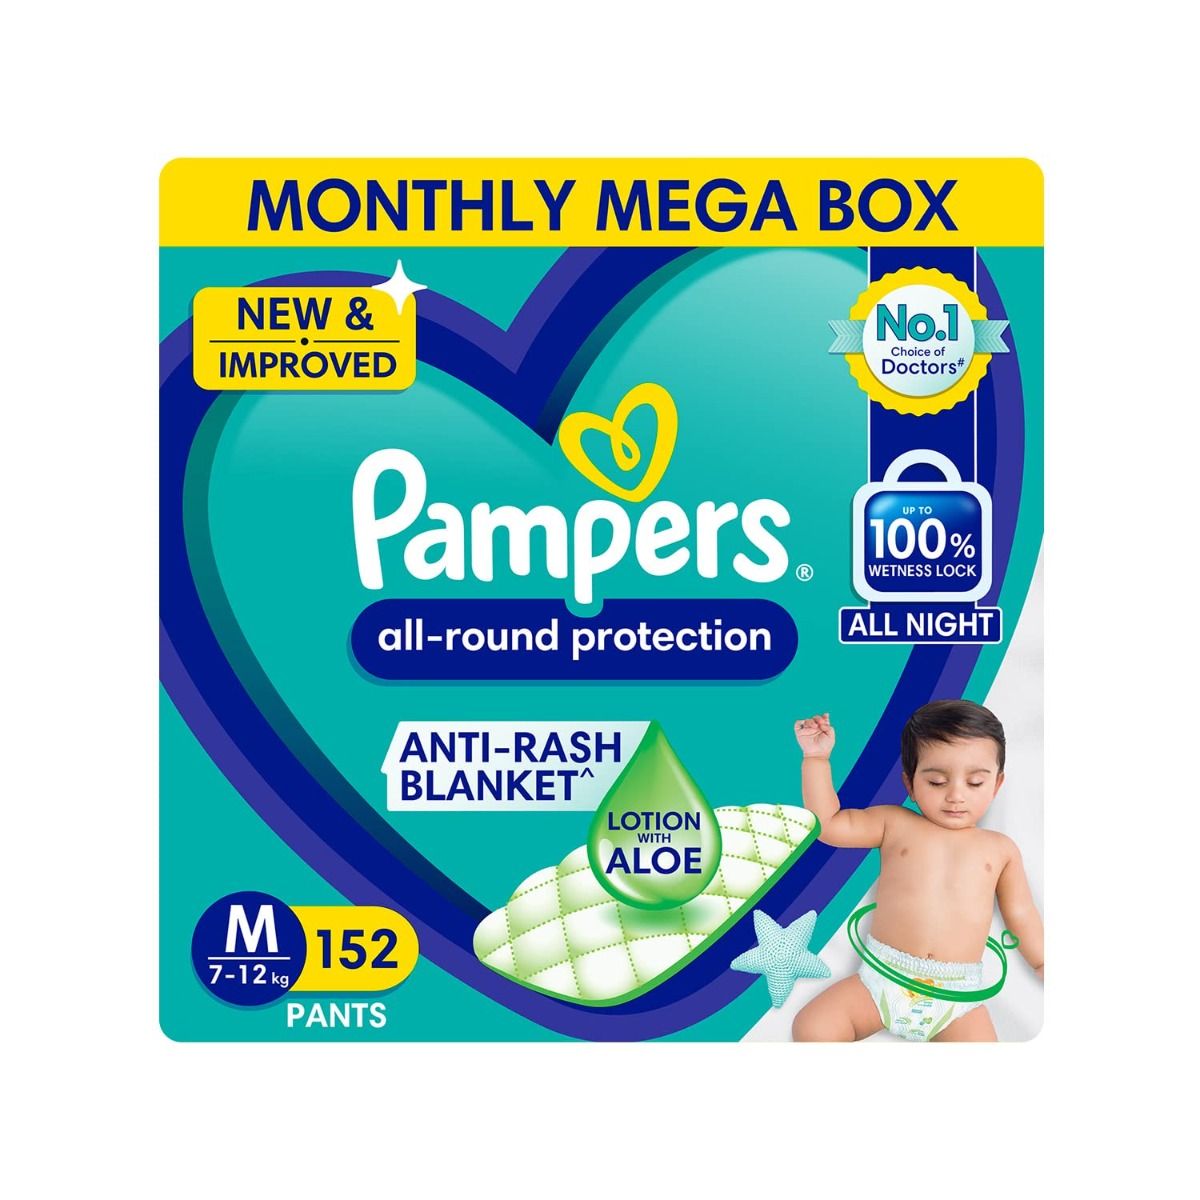 Buy Pampers All-Round Protection Diaper Pants Medium, 152 Count Online